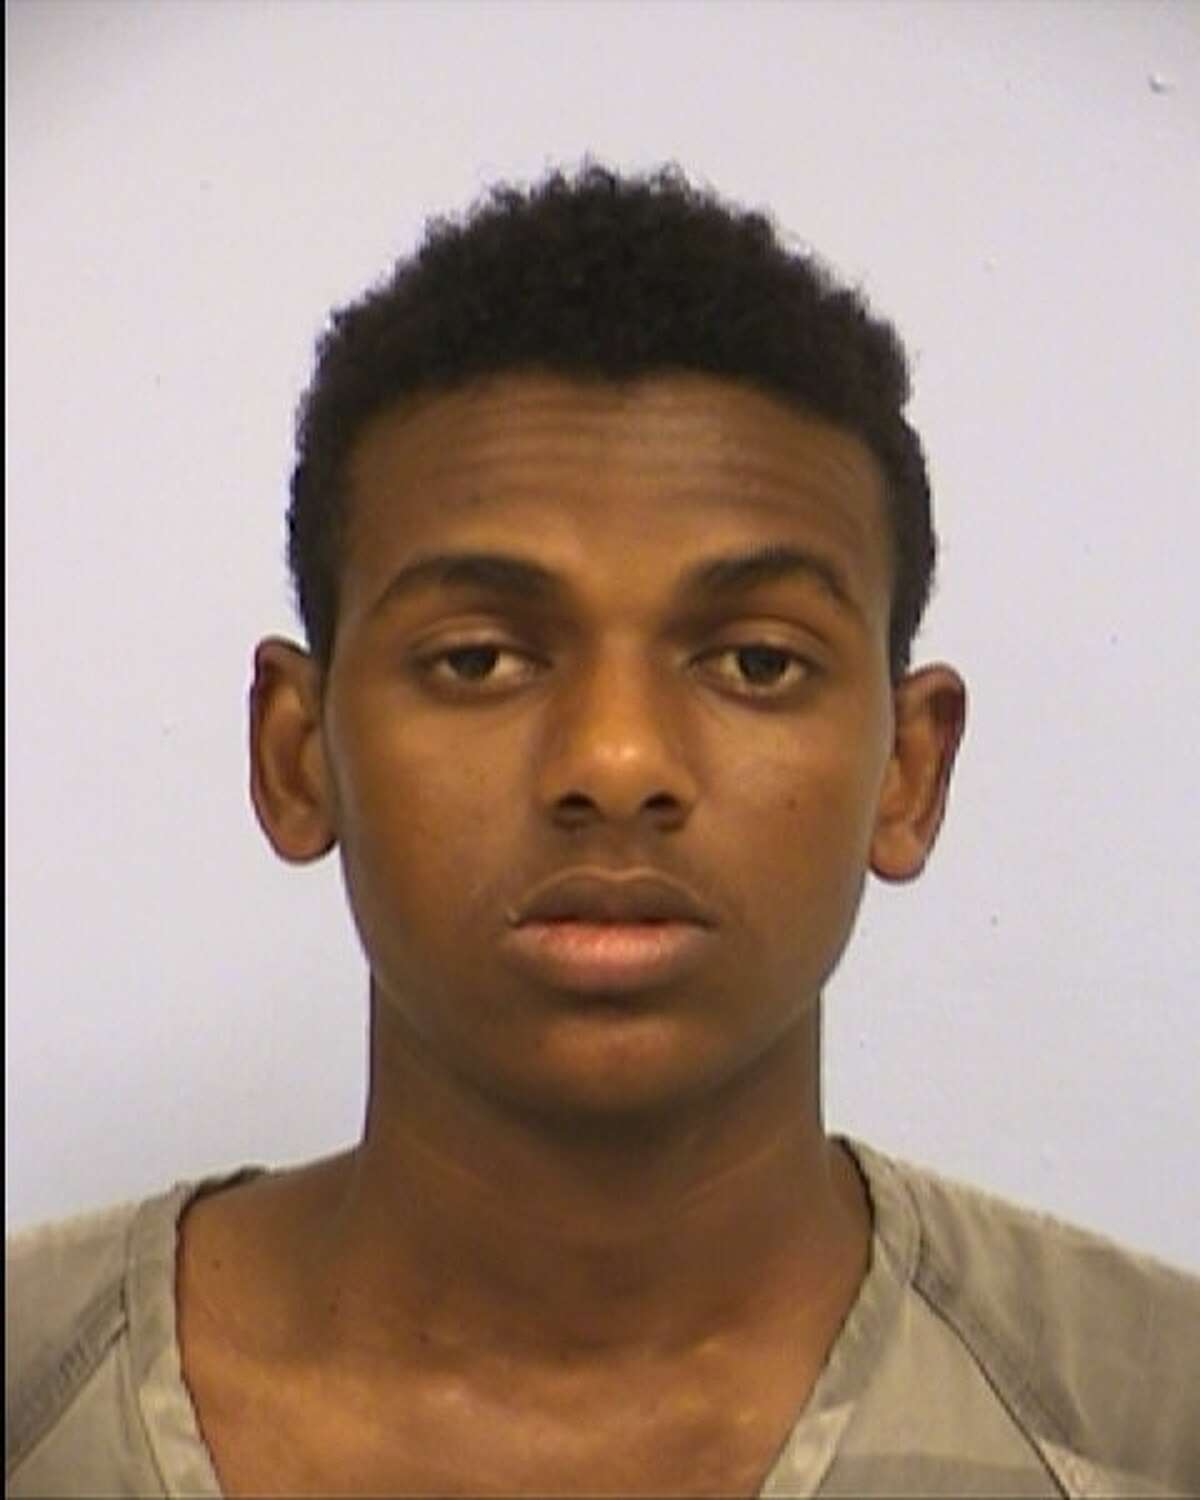 Said Yarow, 18, of Austin, was arrested for allegedly sexually assaulting an unconscious woman in Austin on a bench.